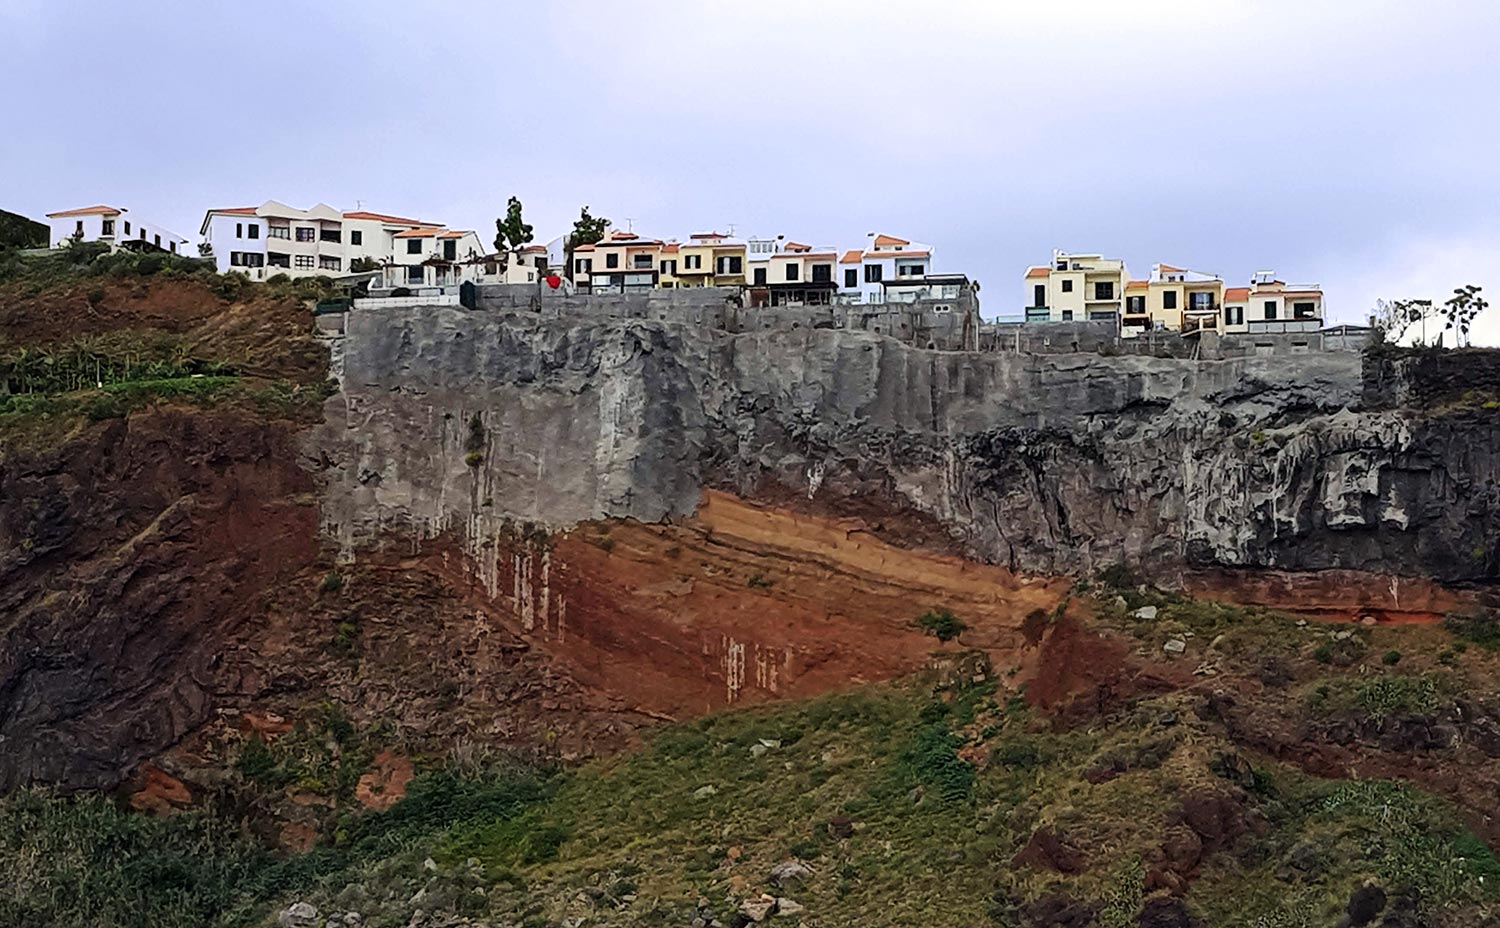 A row of houses along the top of a rocky cliff face